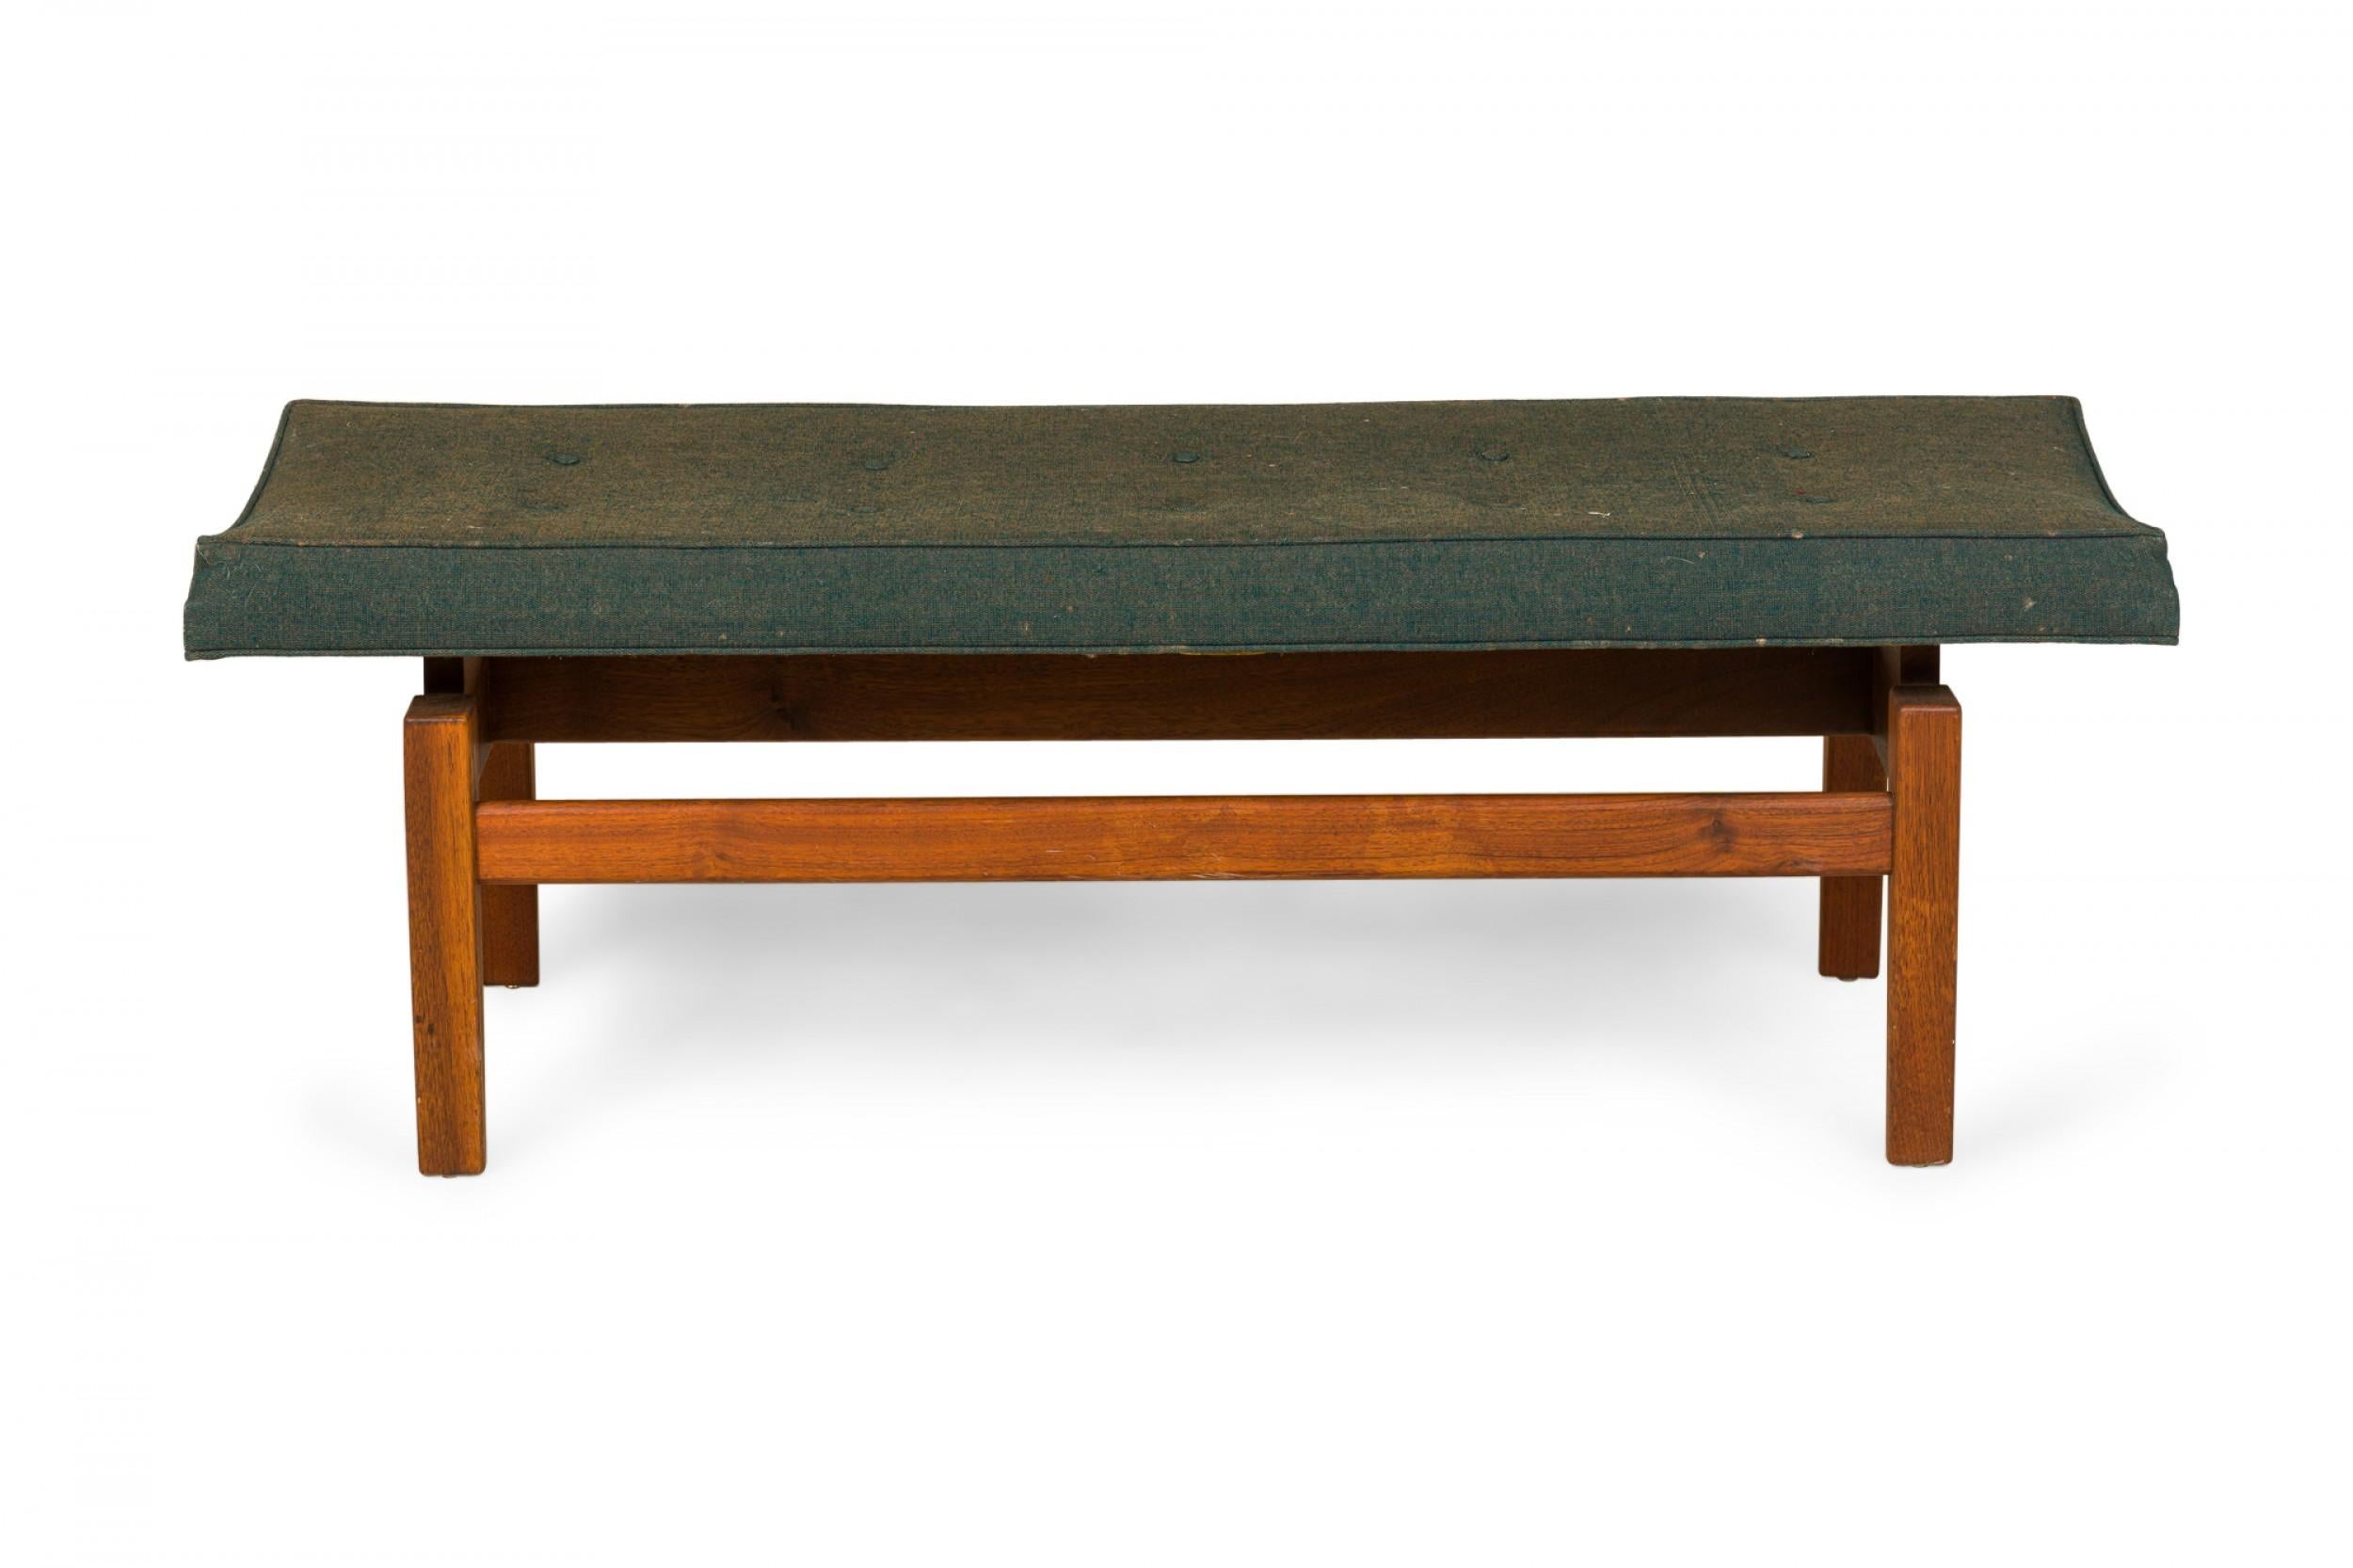 20th Century Jens Risom Danish Army Green Fabric Upholstery and Wood Floating Bench For Sale